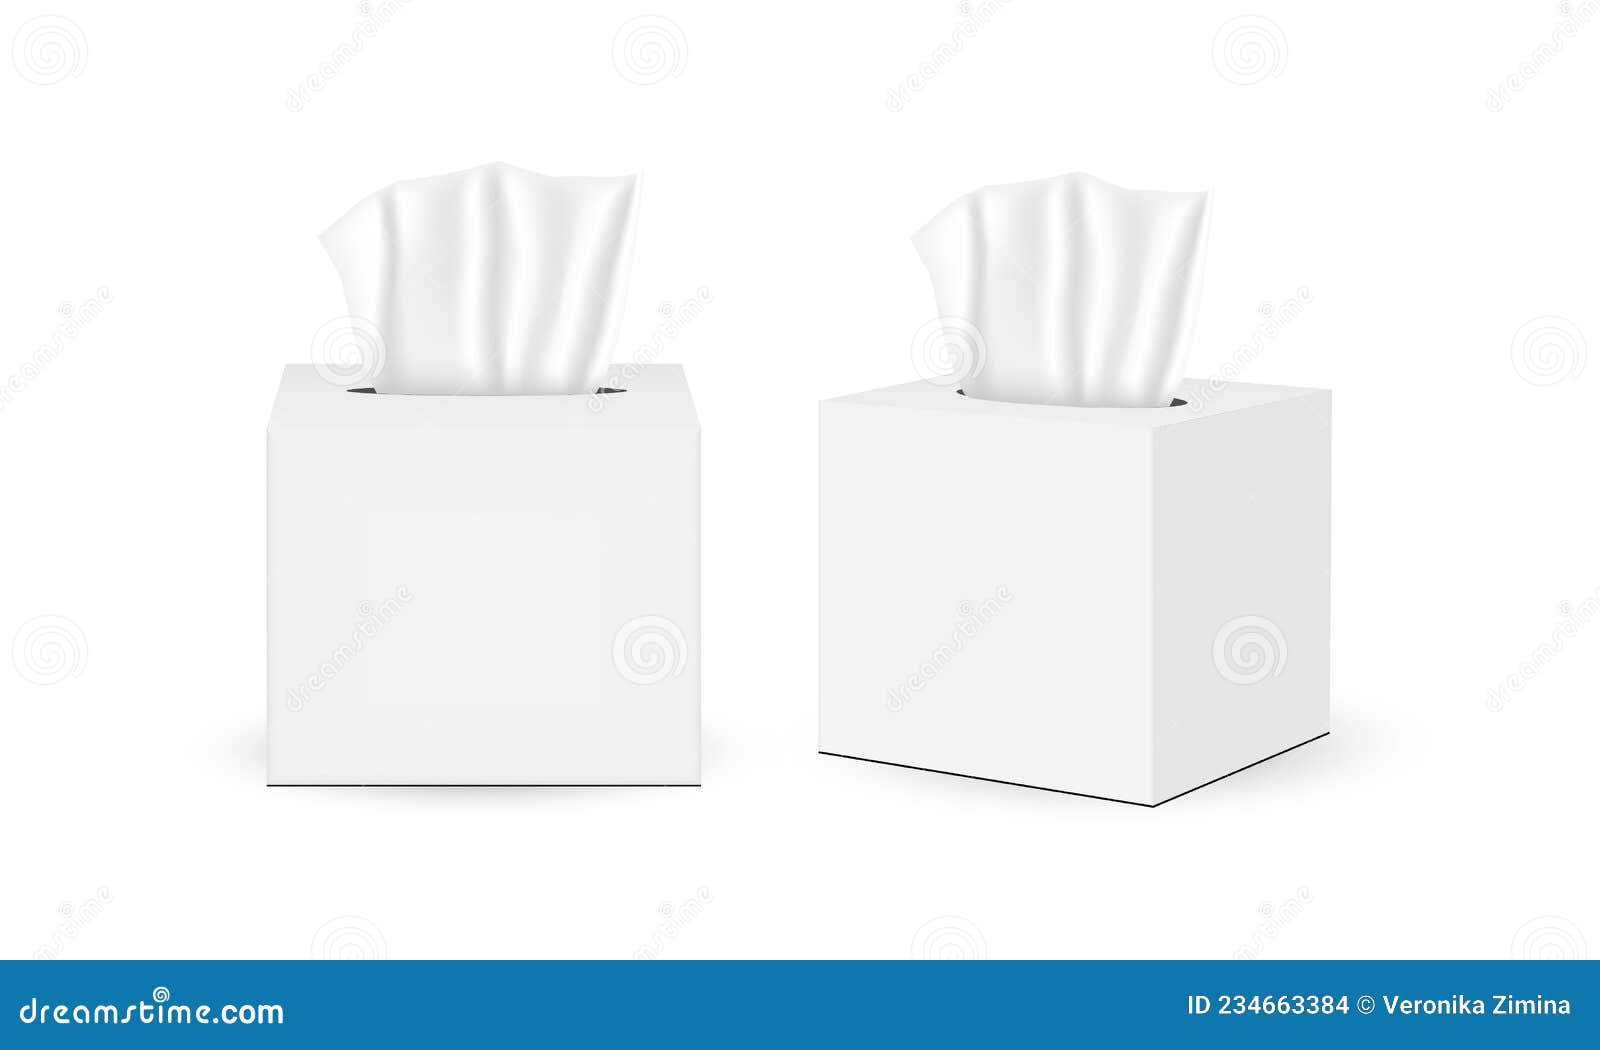 Square Tissues Boxes, Isolated on White Background, Front and Side